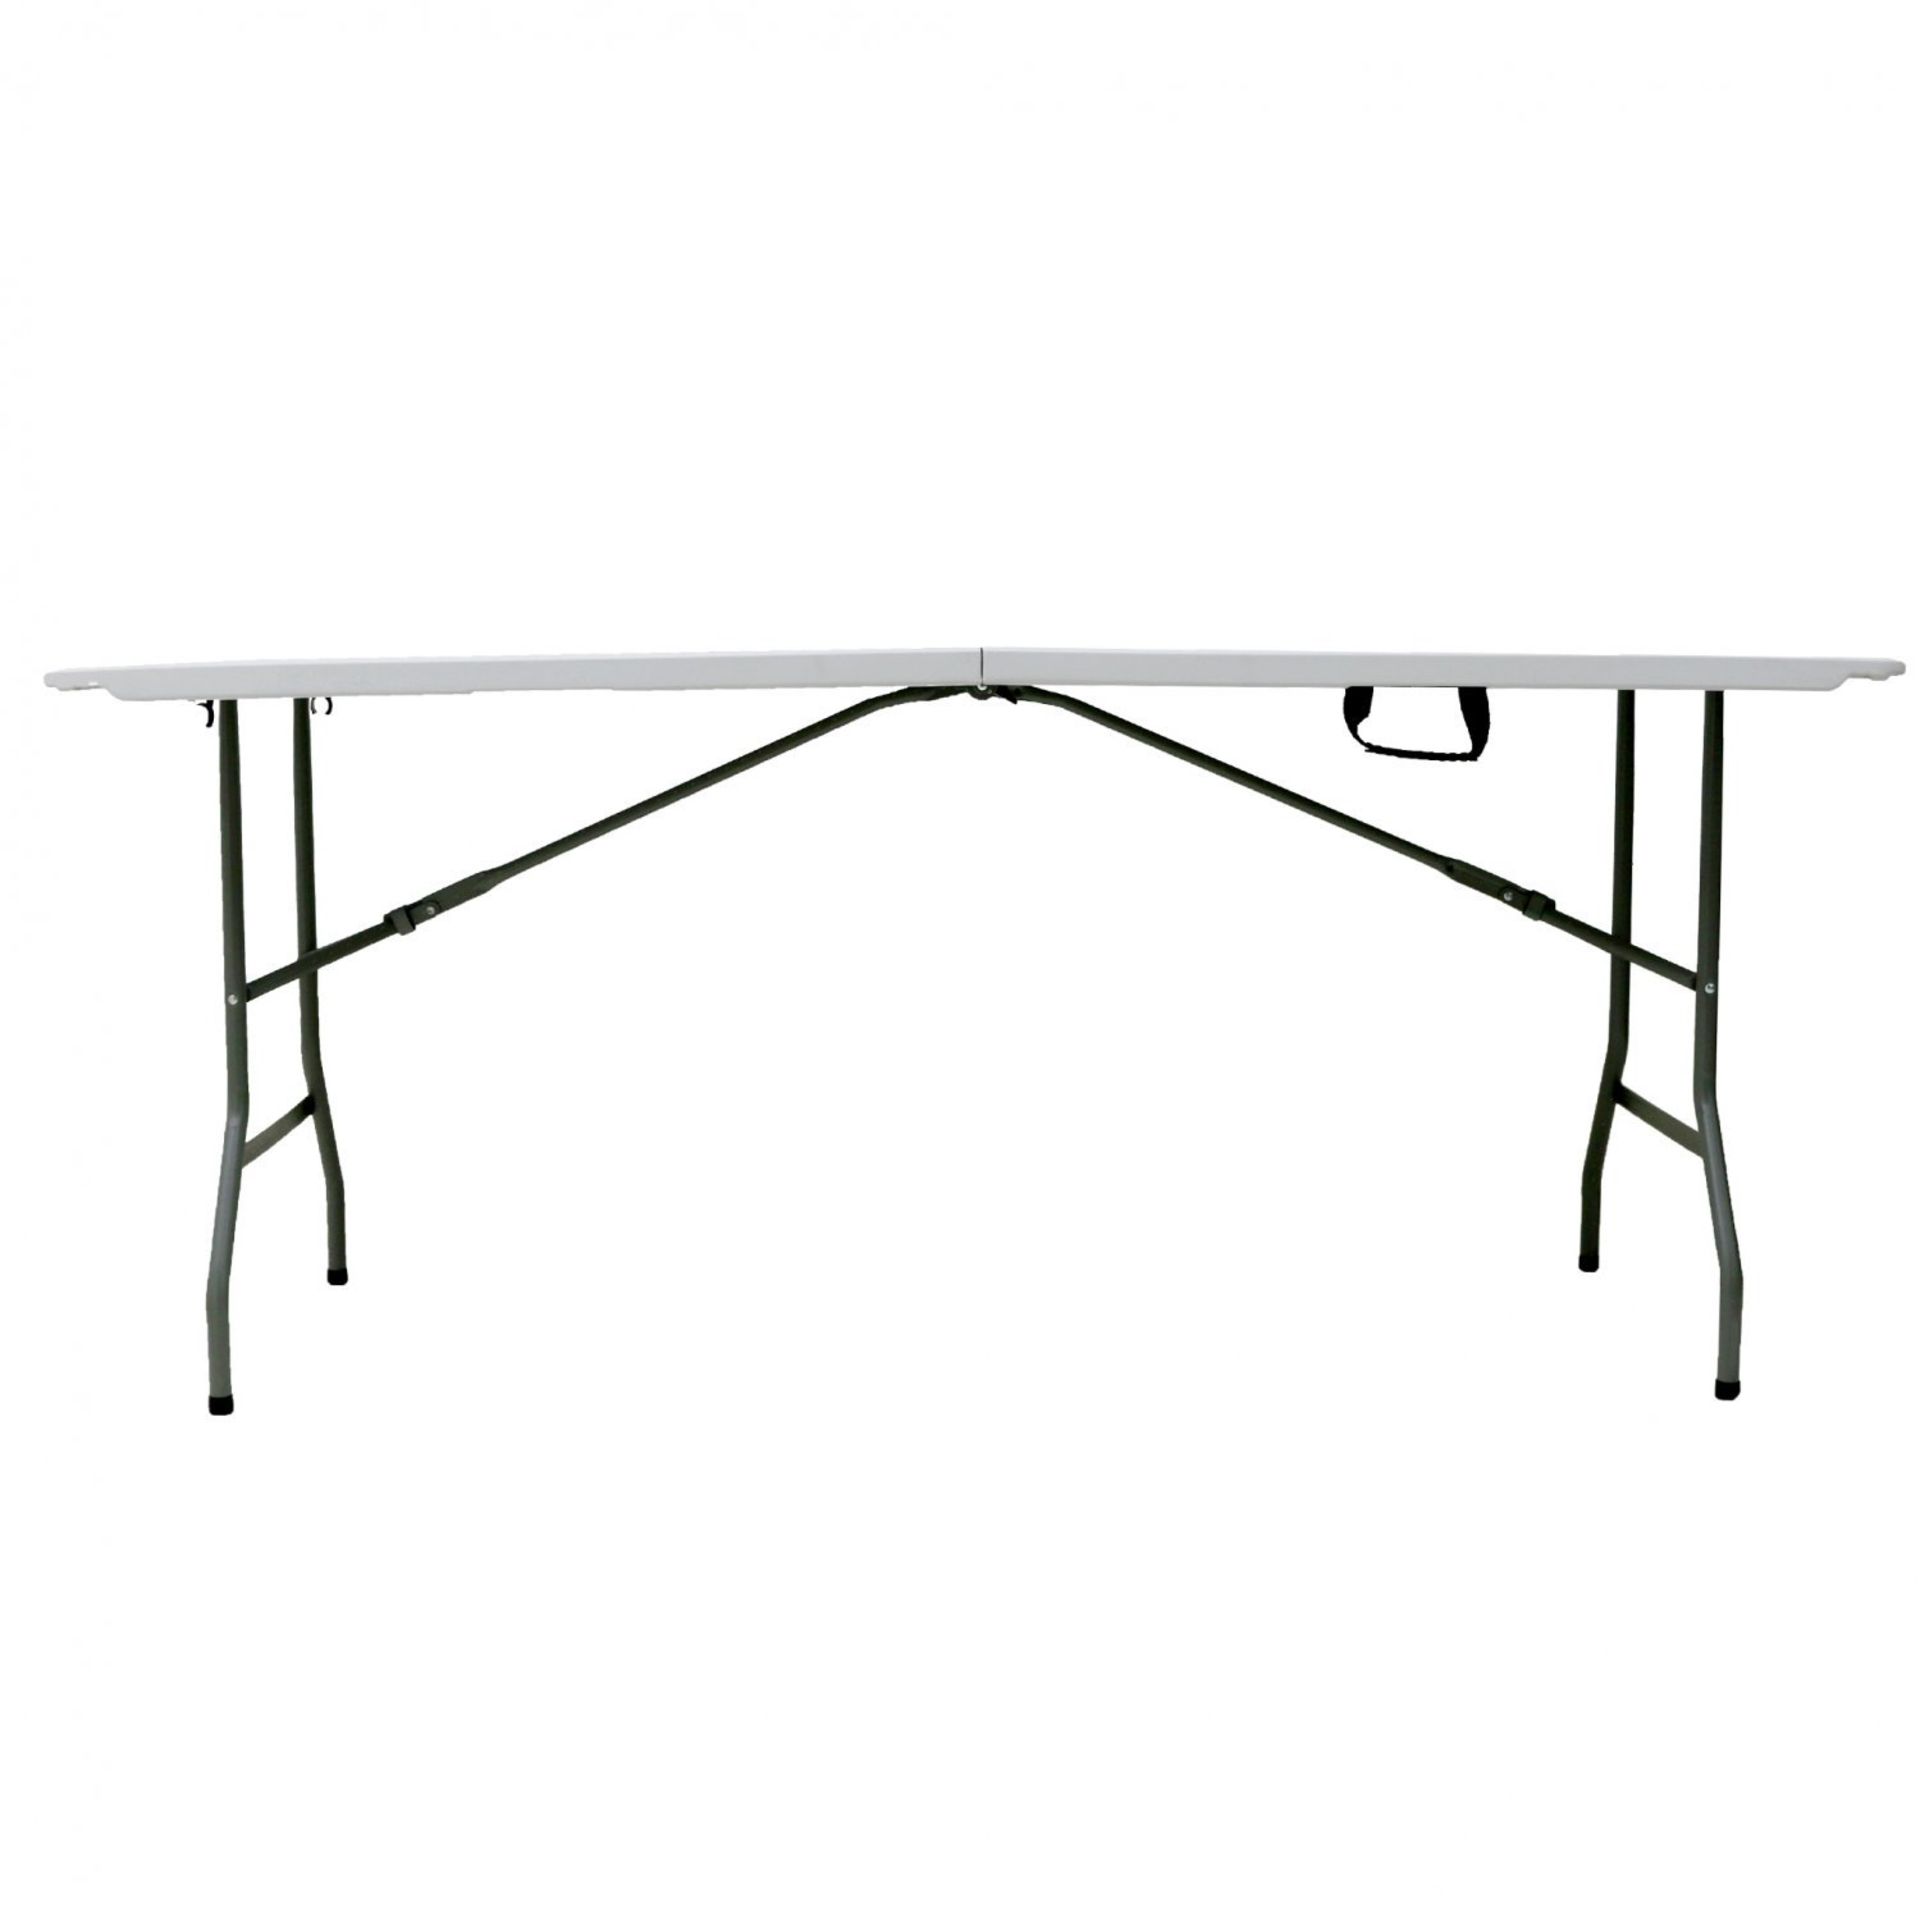 (RU48) 6ft 1.8m Folding Heavy Duty Catering Outdoor Trestle Party Garden Table The folding ... - Image 2 of 2